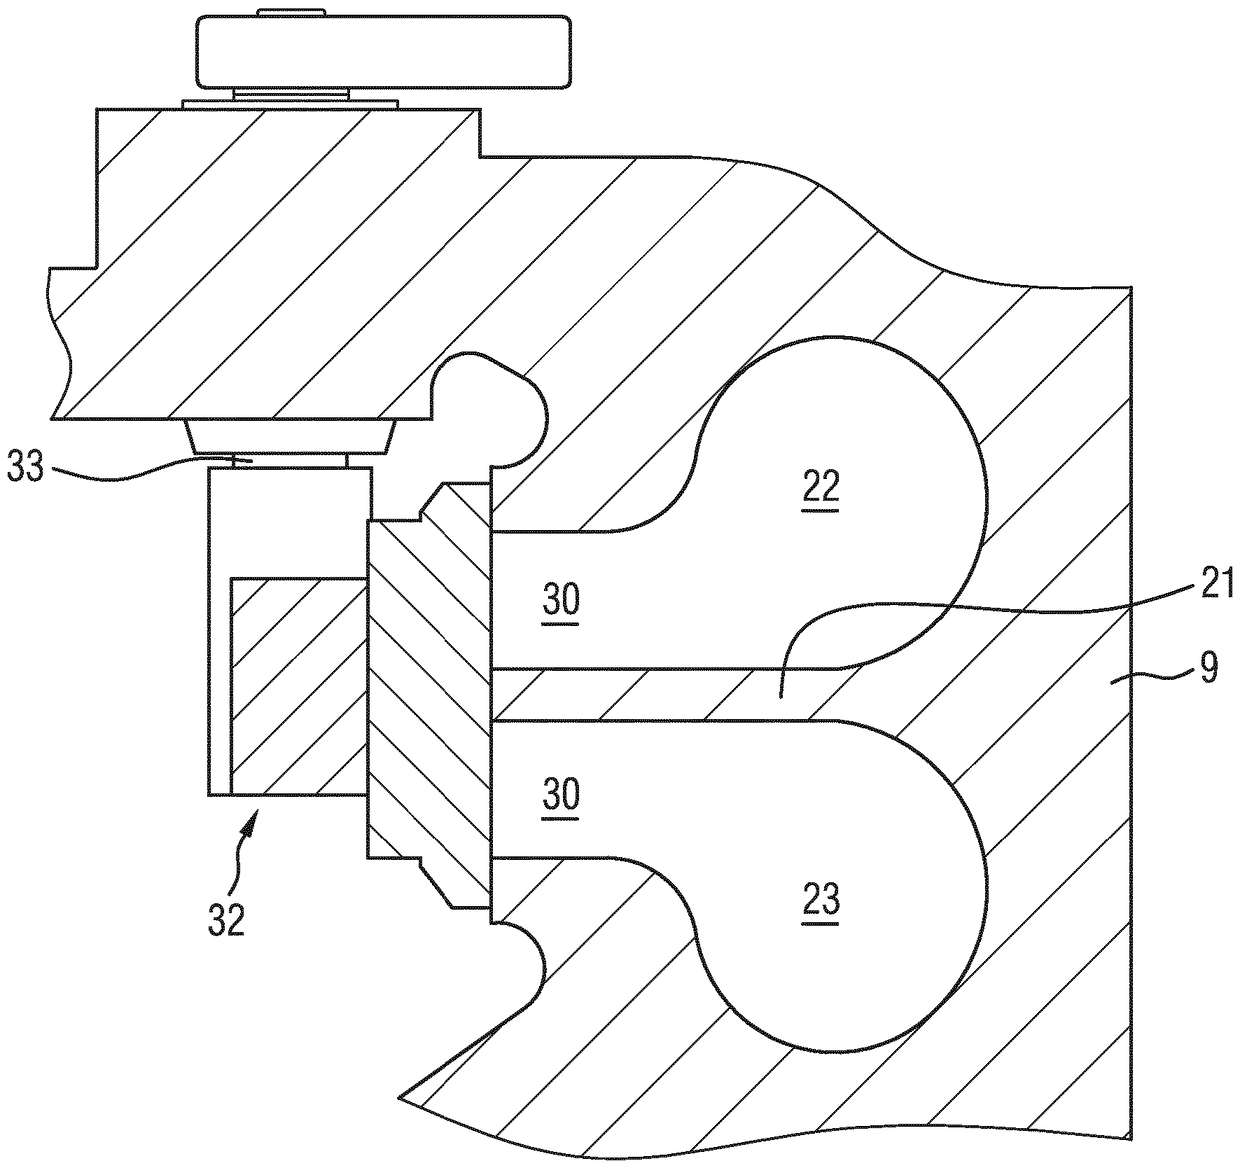 Turbine for an exhaust turbocharger having a two-volute turbine housing and a linear valve for volute connection and wastegate control